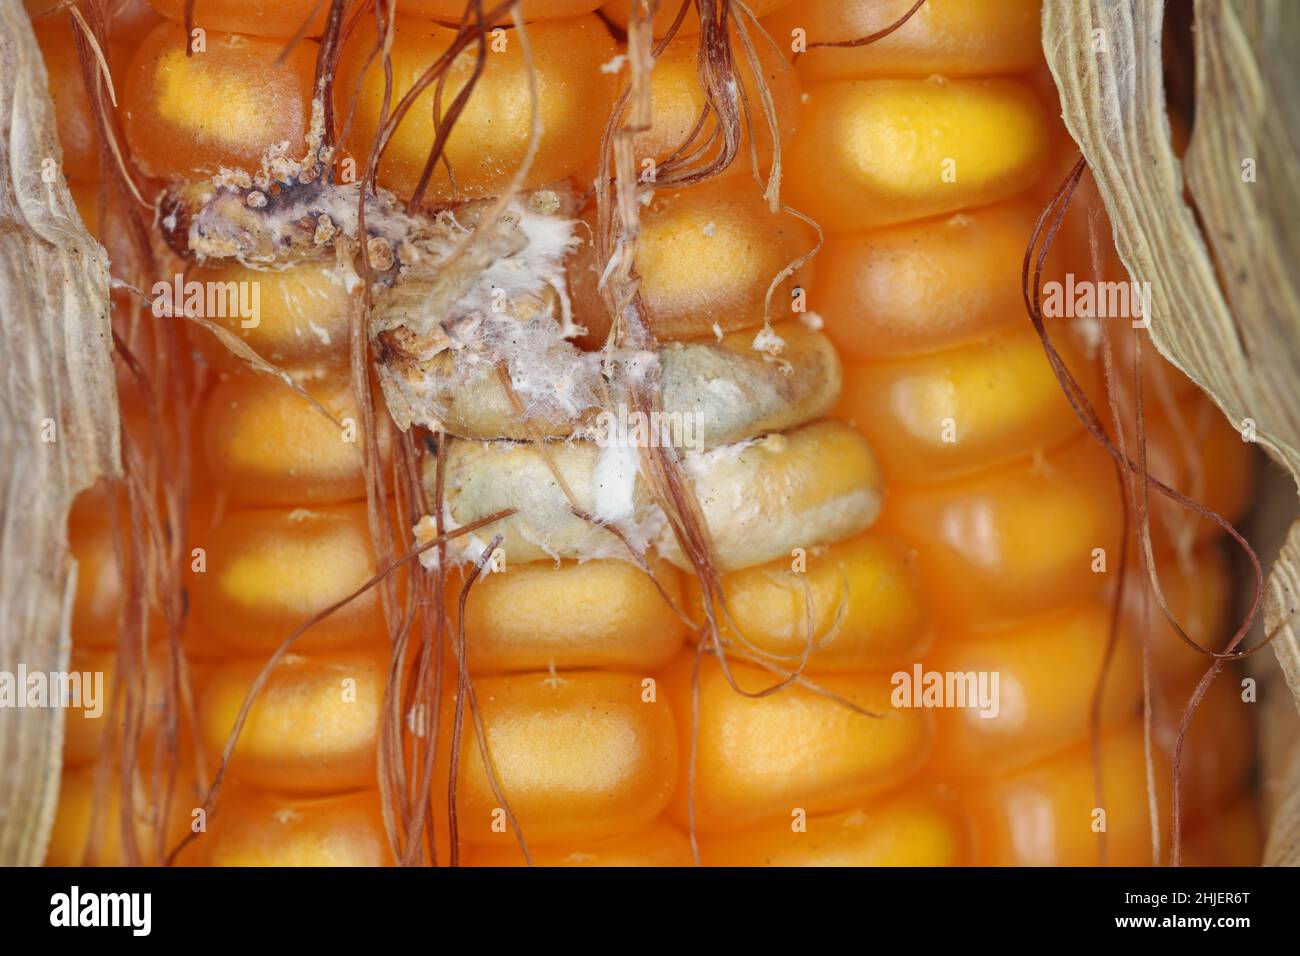 Fusarium ear rot symptoms on kernels. A serious disease of maize caused by a fungus Fusarium. F. verticillioides. Causes significant grain yield losse Stock Photo